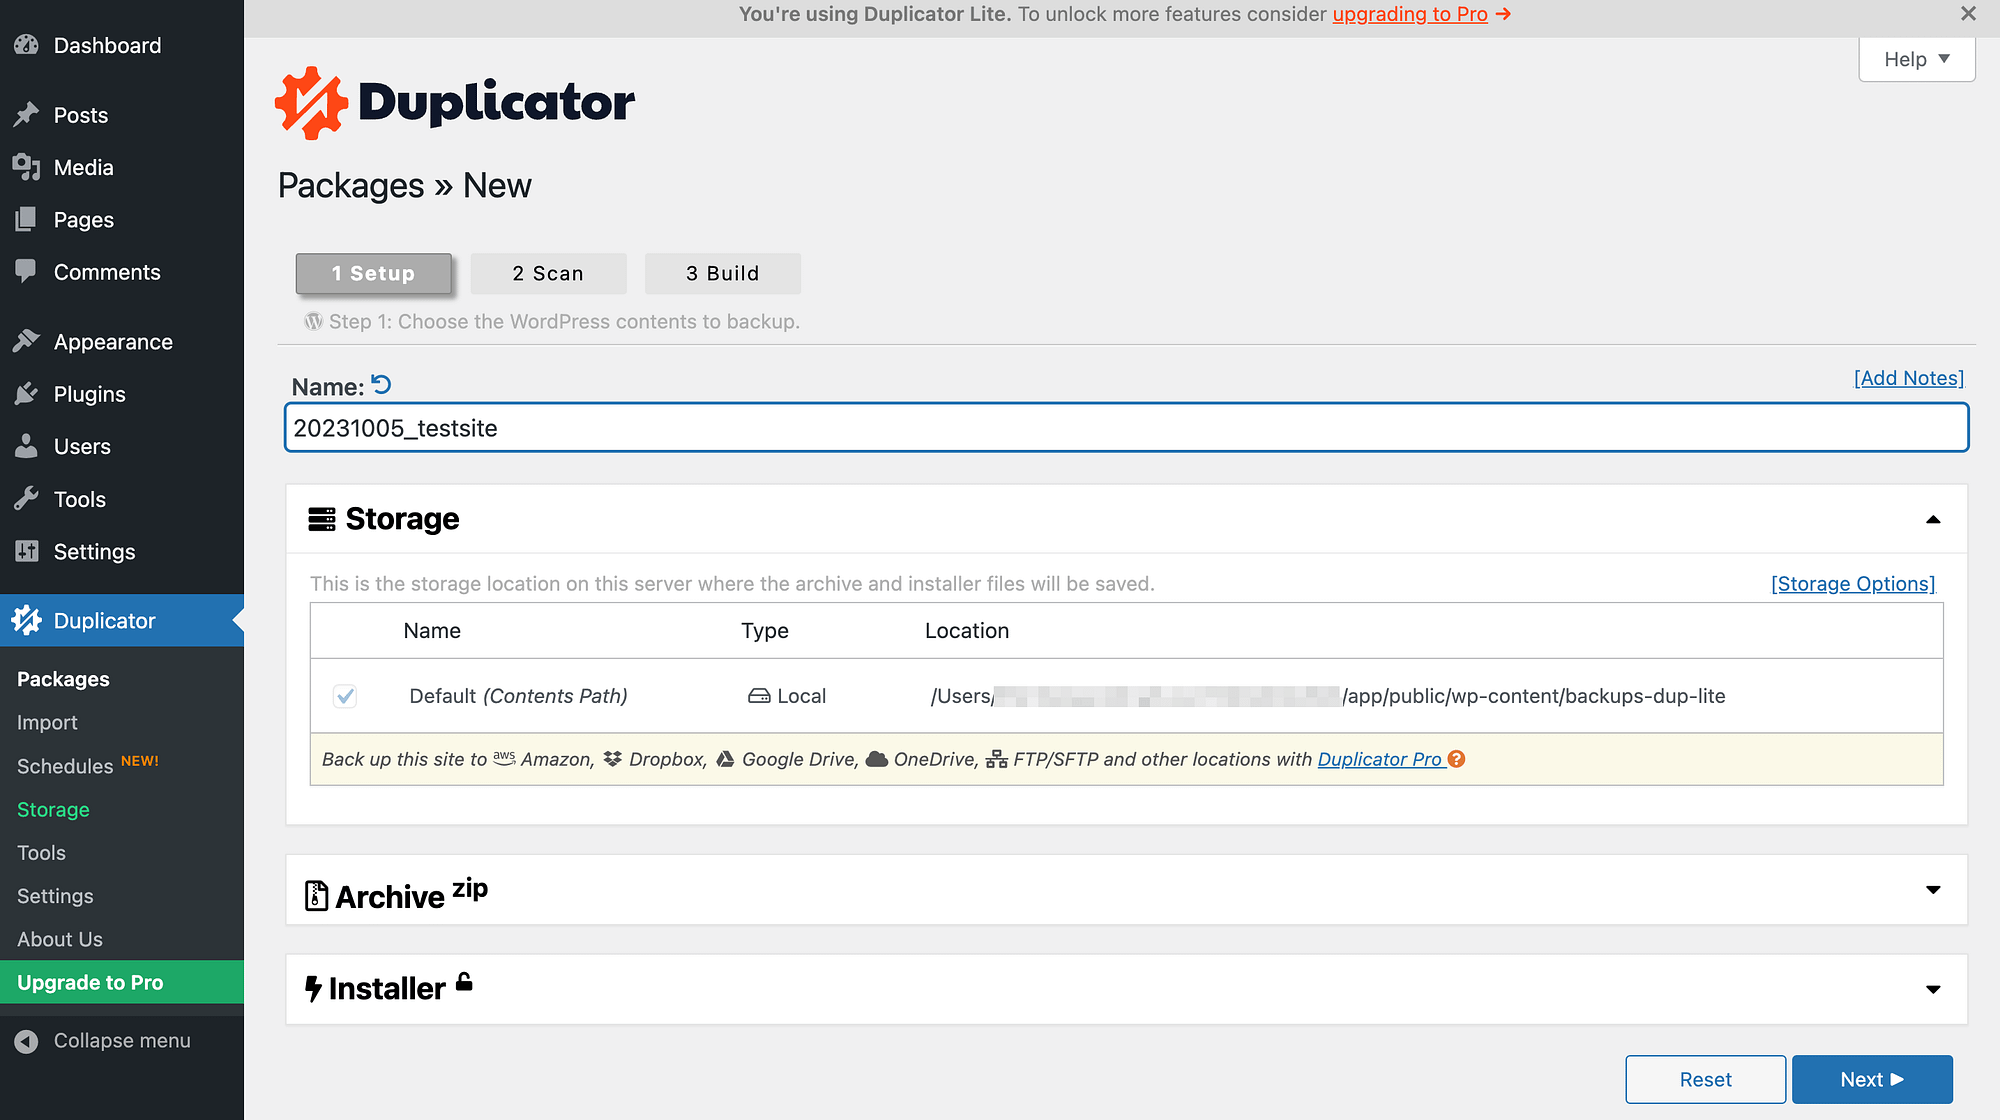 Creating your first package in Duplicator.